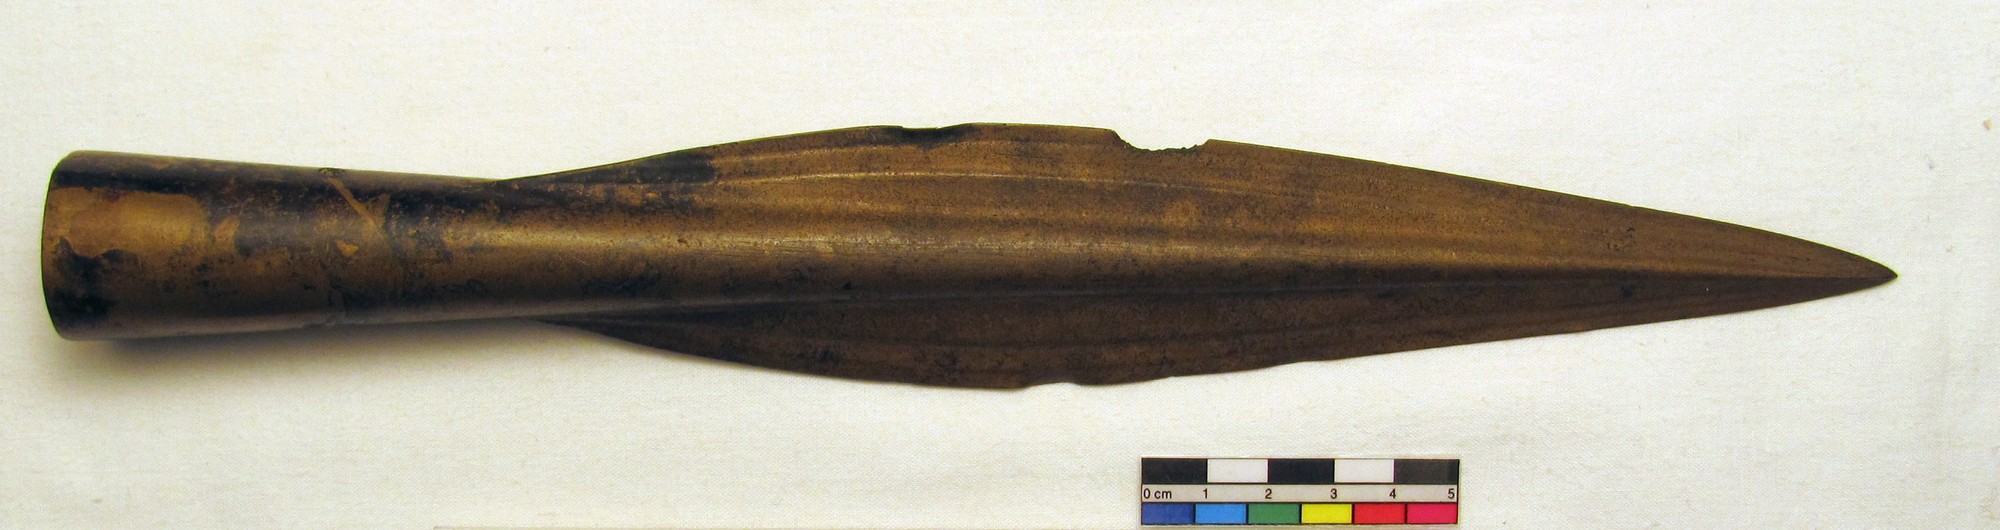 Example of a LBA socketed spearhead (1891,0514.6) originating from the Roots Collection, now in the BM © Trustees of the British Museum